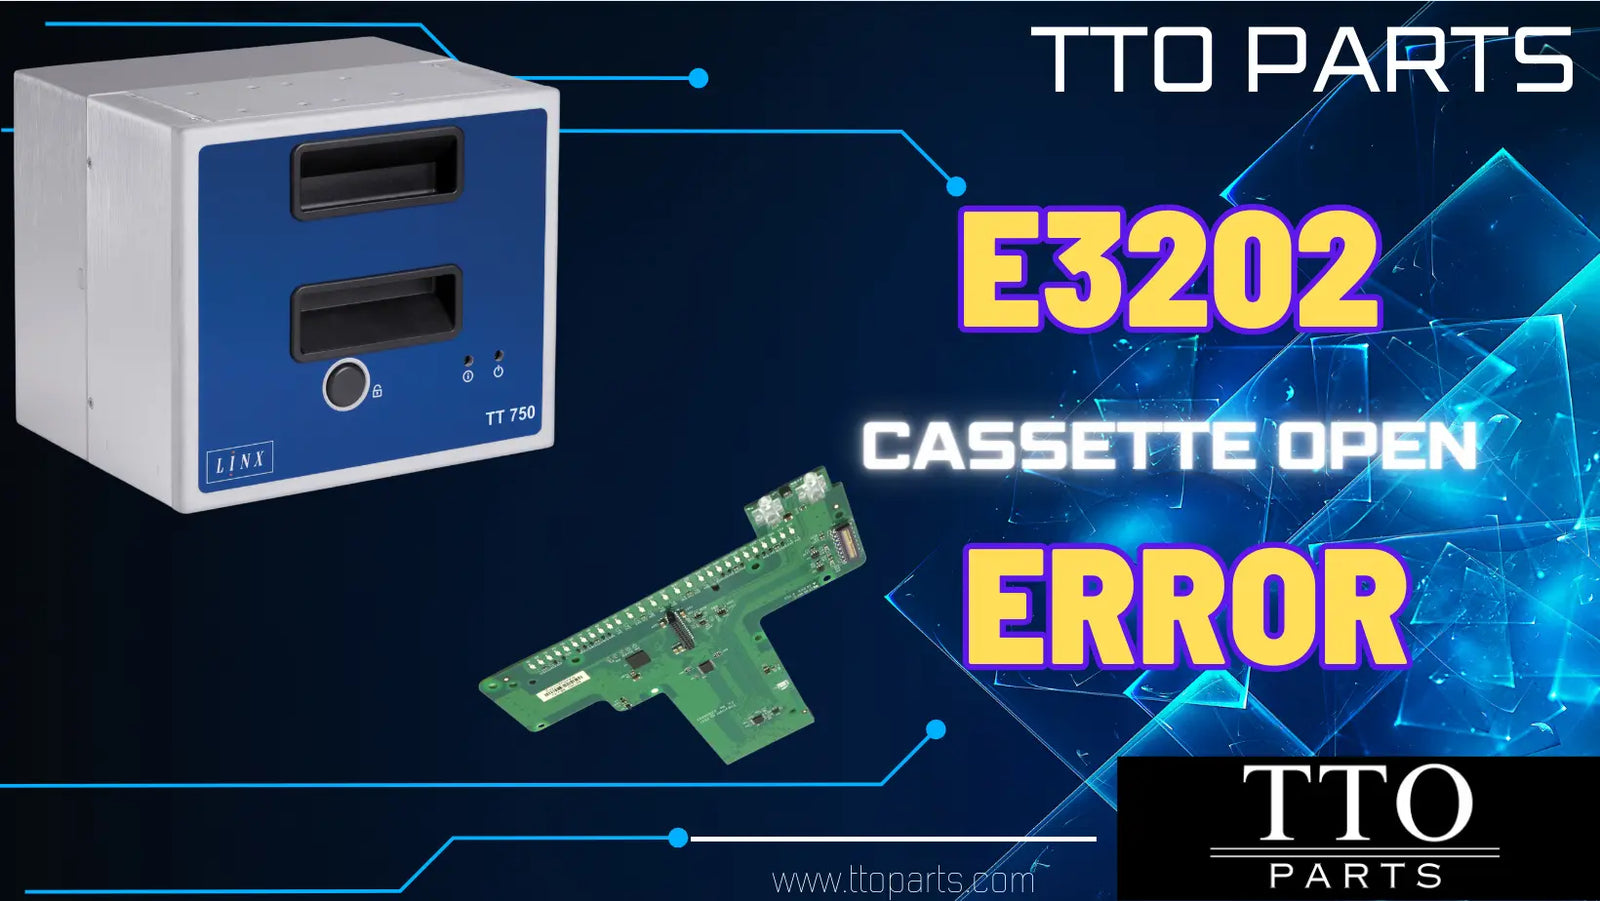 Troubleshooting E3202 Cassette Open Error in Videojet and Linx TTO Printers